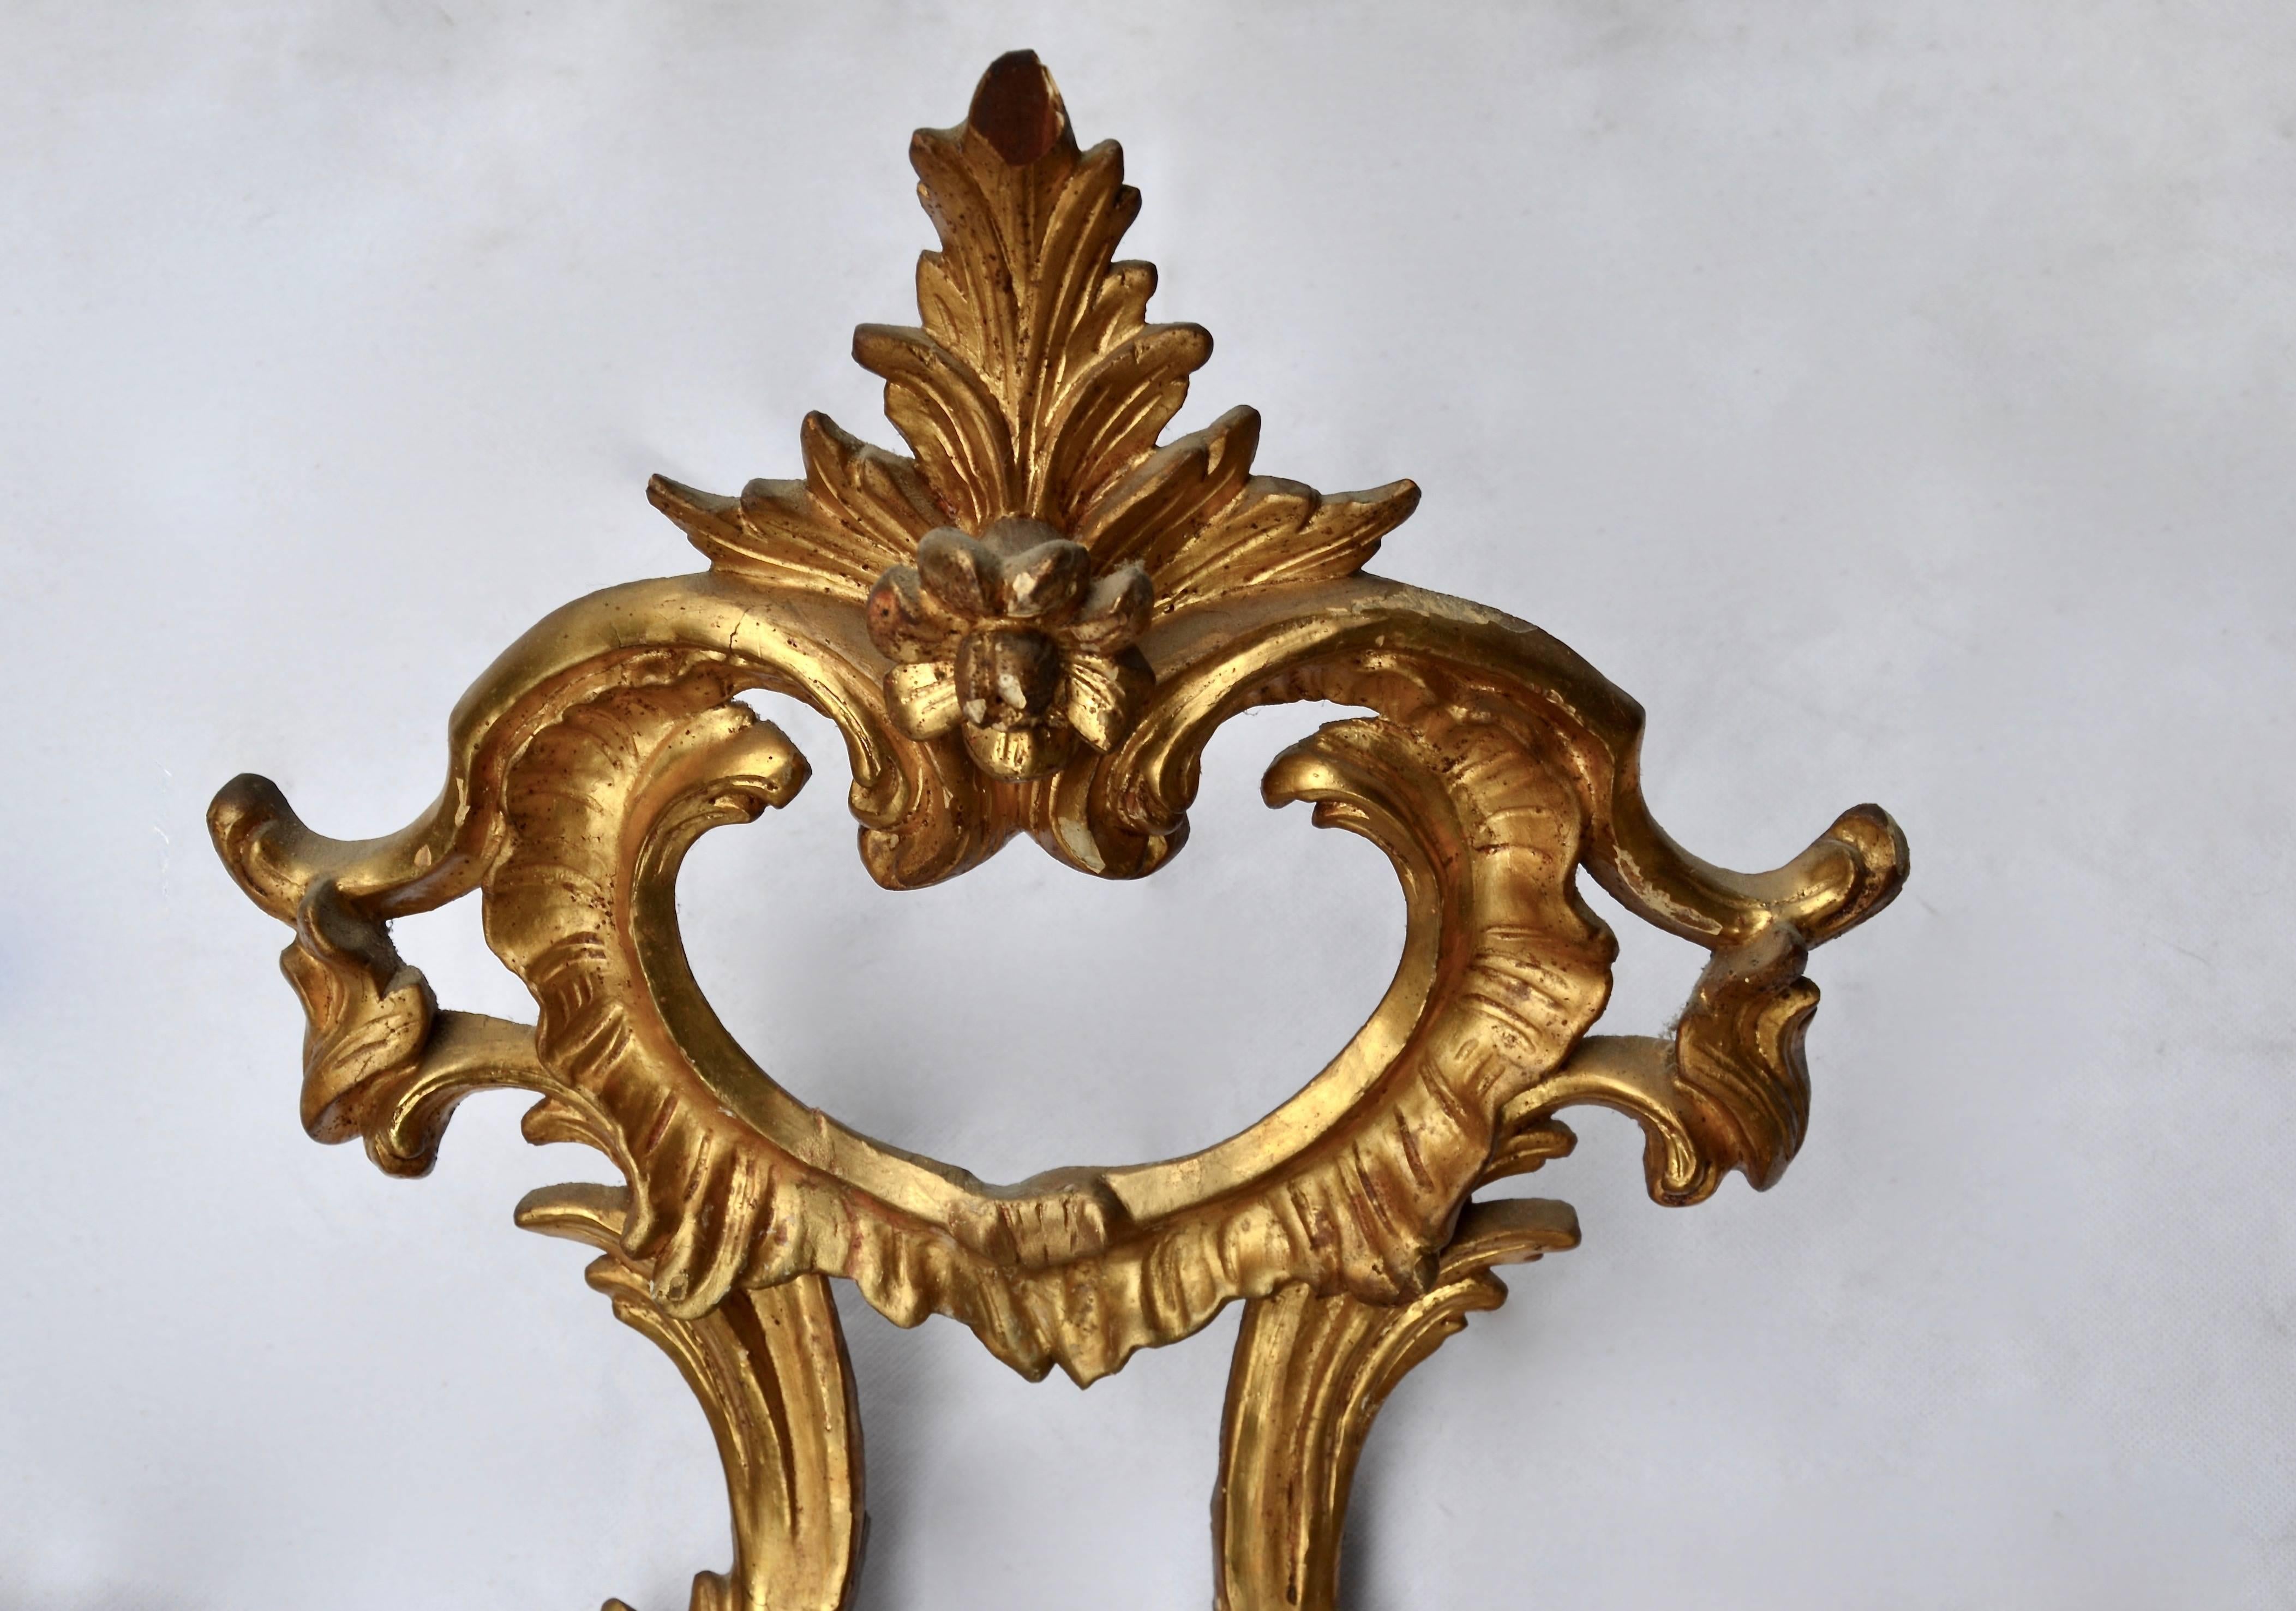 Original 18th century mirrors, and beautiful quality in the carving and the gilding of the wood.